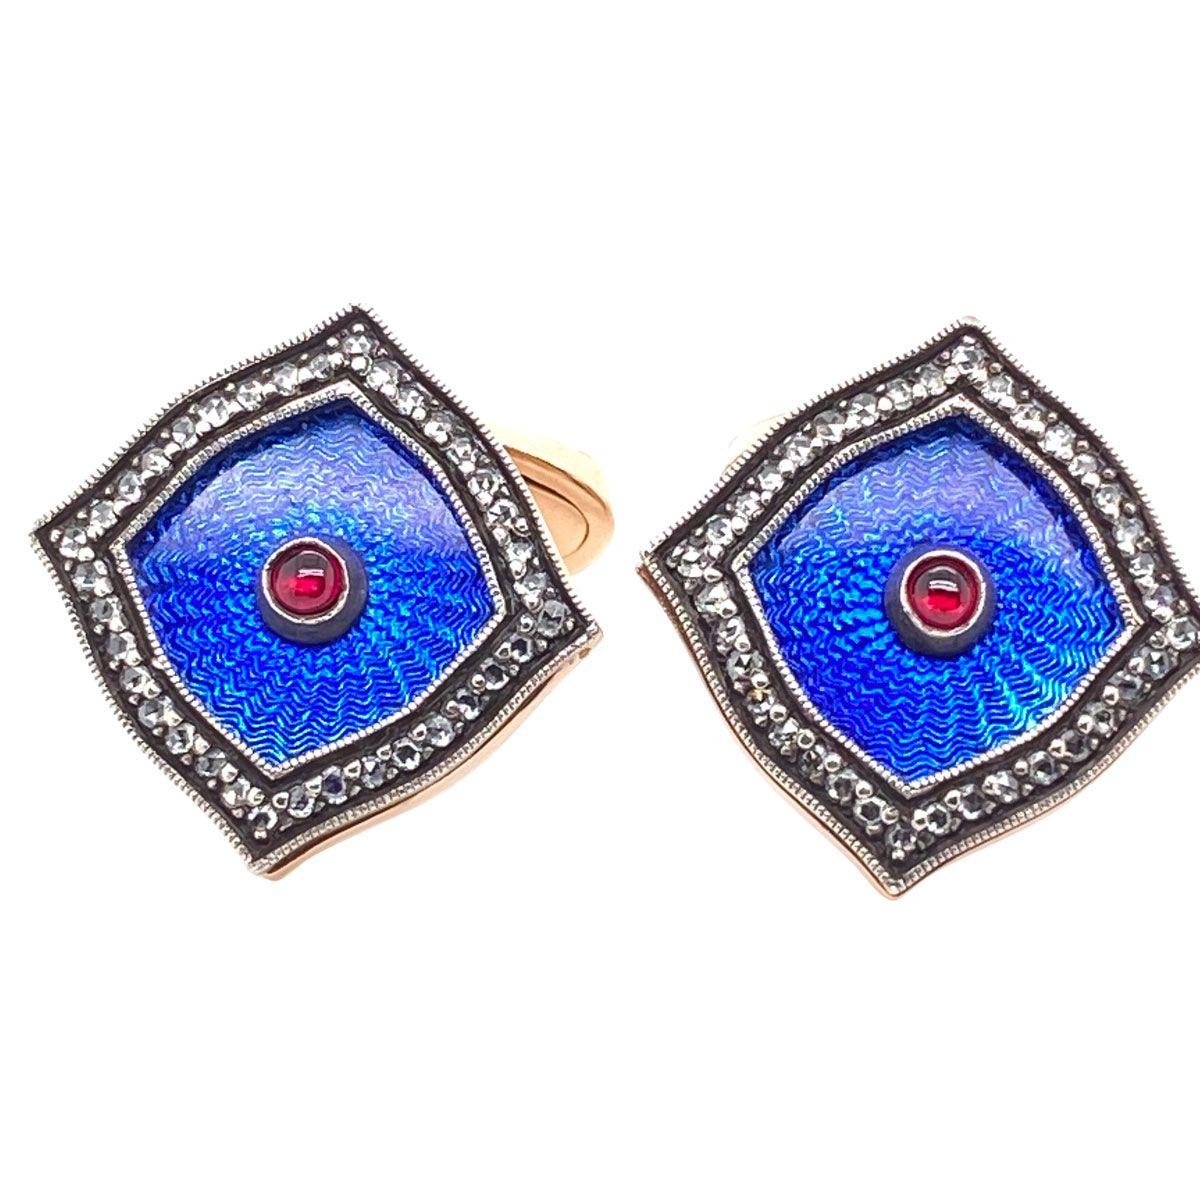 A set of cufflinks with so much style, suitable for the man or the woman of business. Fashioned from 14k rose gold they feature beautifully detailed guillouche enamel work which is highlighted by a subtle border of rose cut diamonds in silver. The